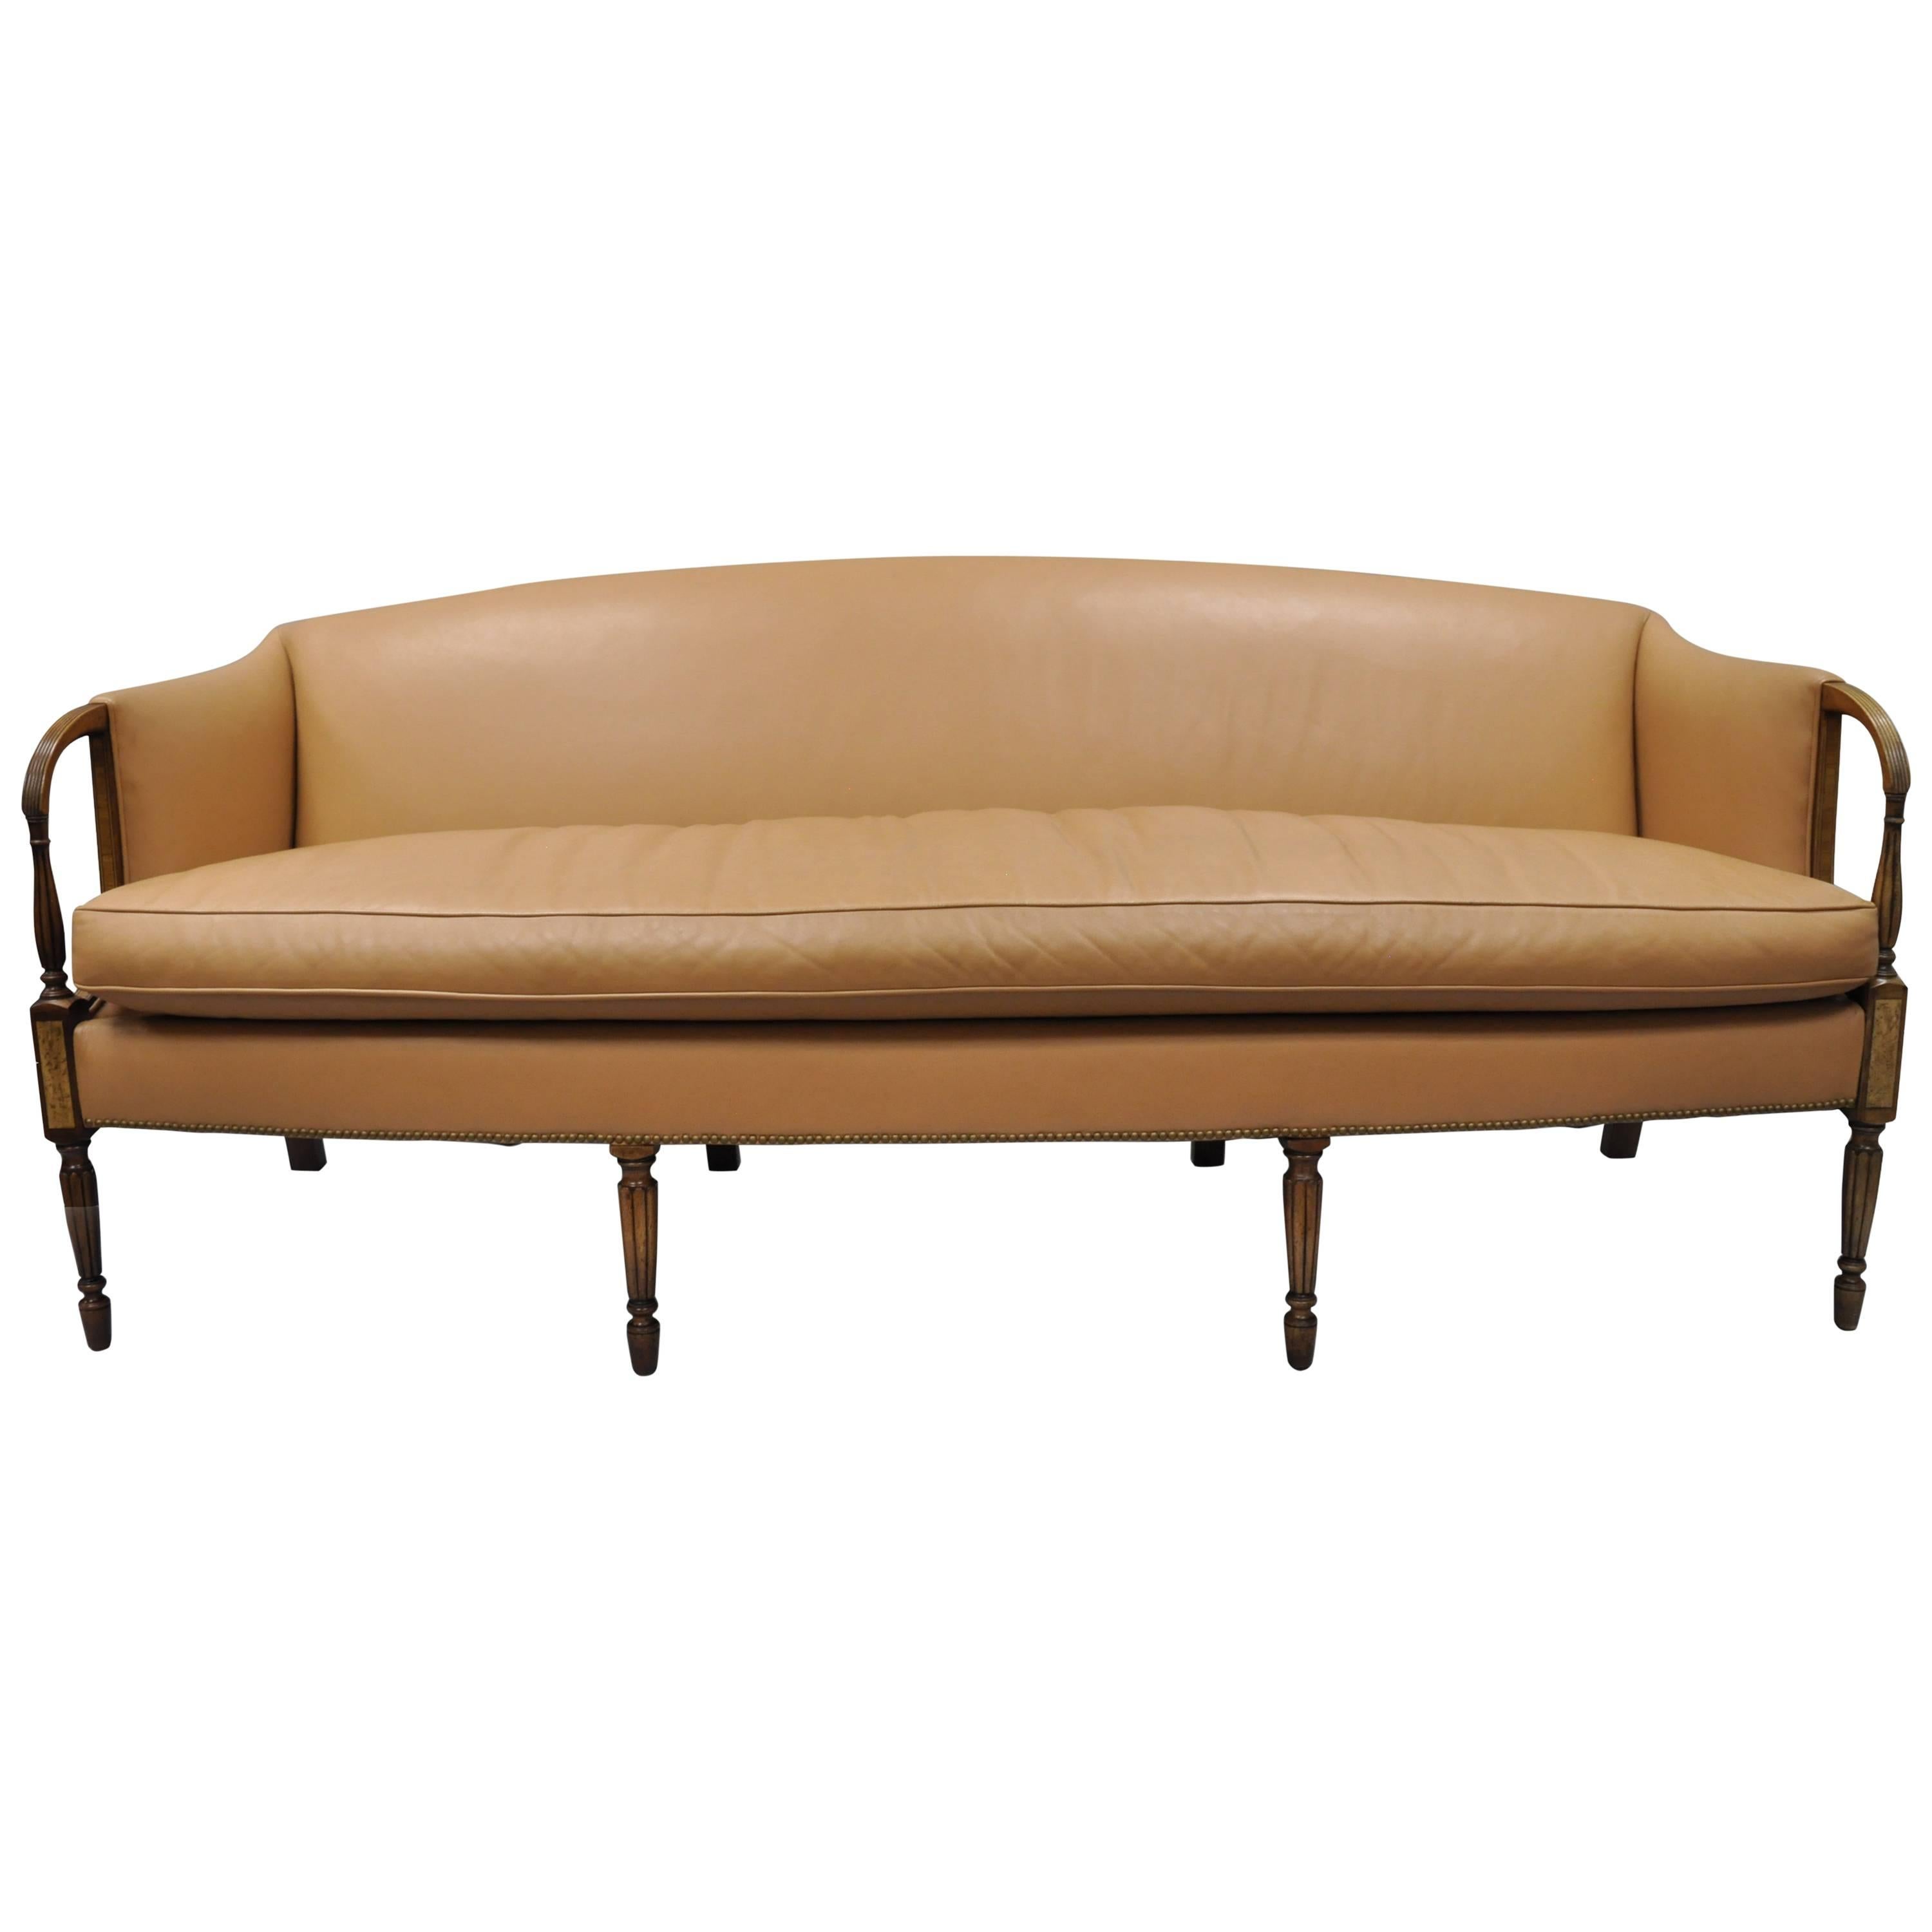 Sheraton Federal Style Caramel Tan Leather Upholstered Inlaid Sofa by Southwood 